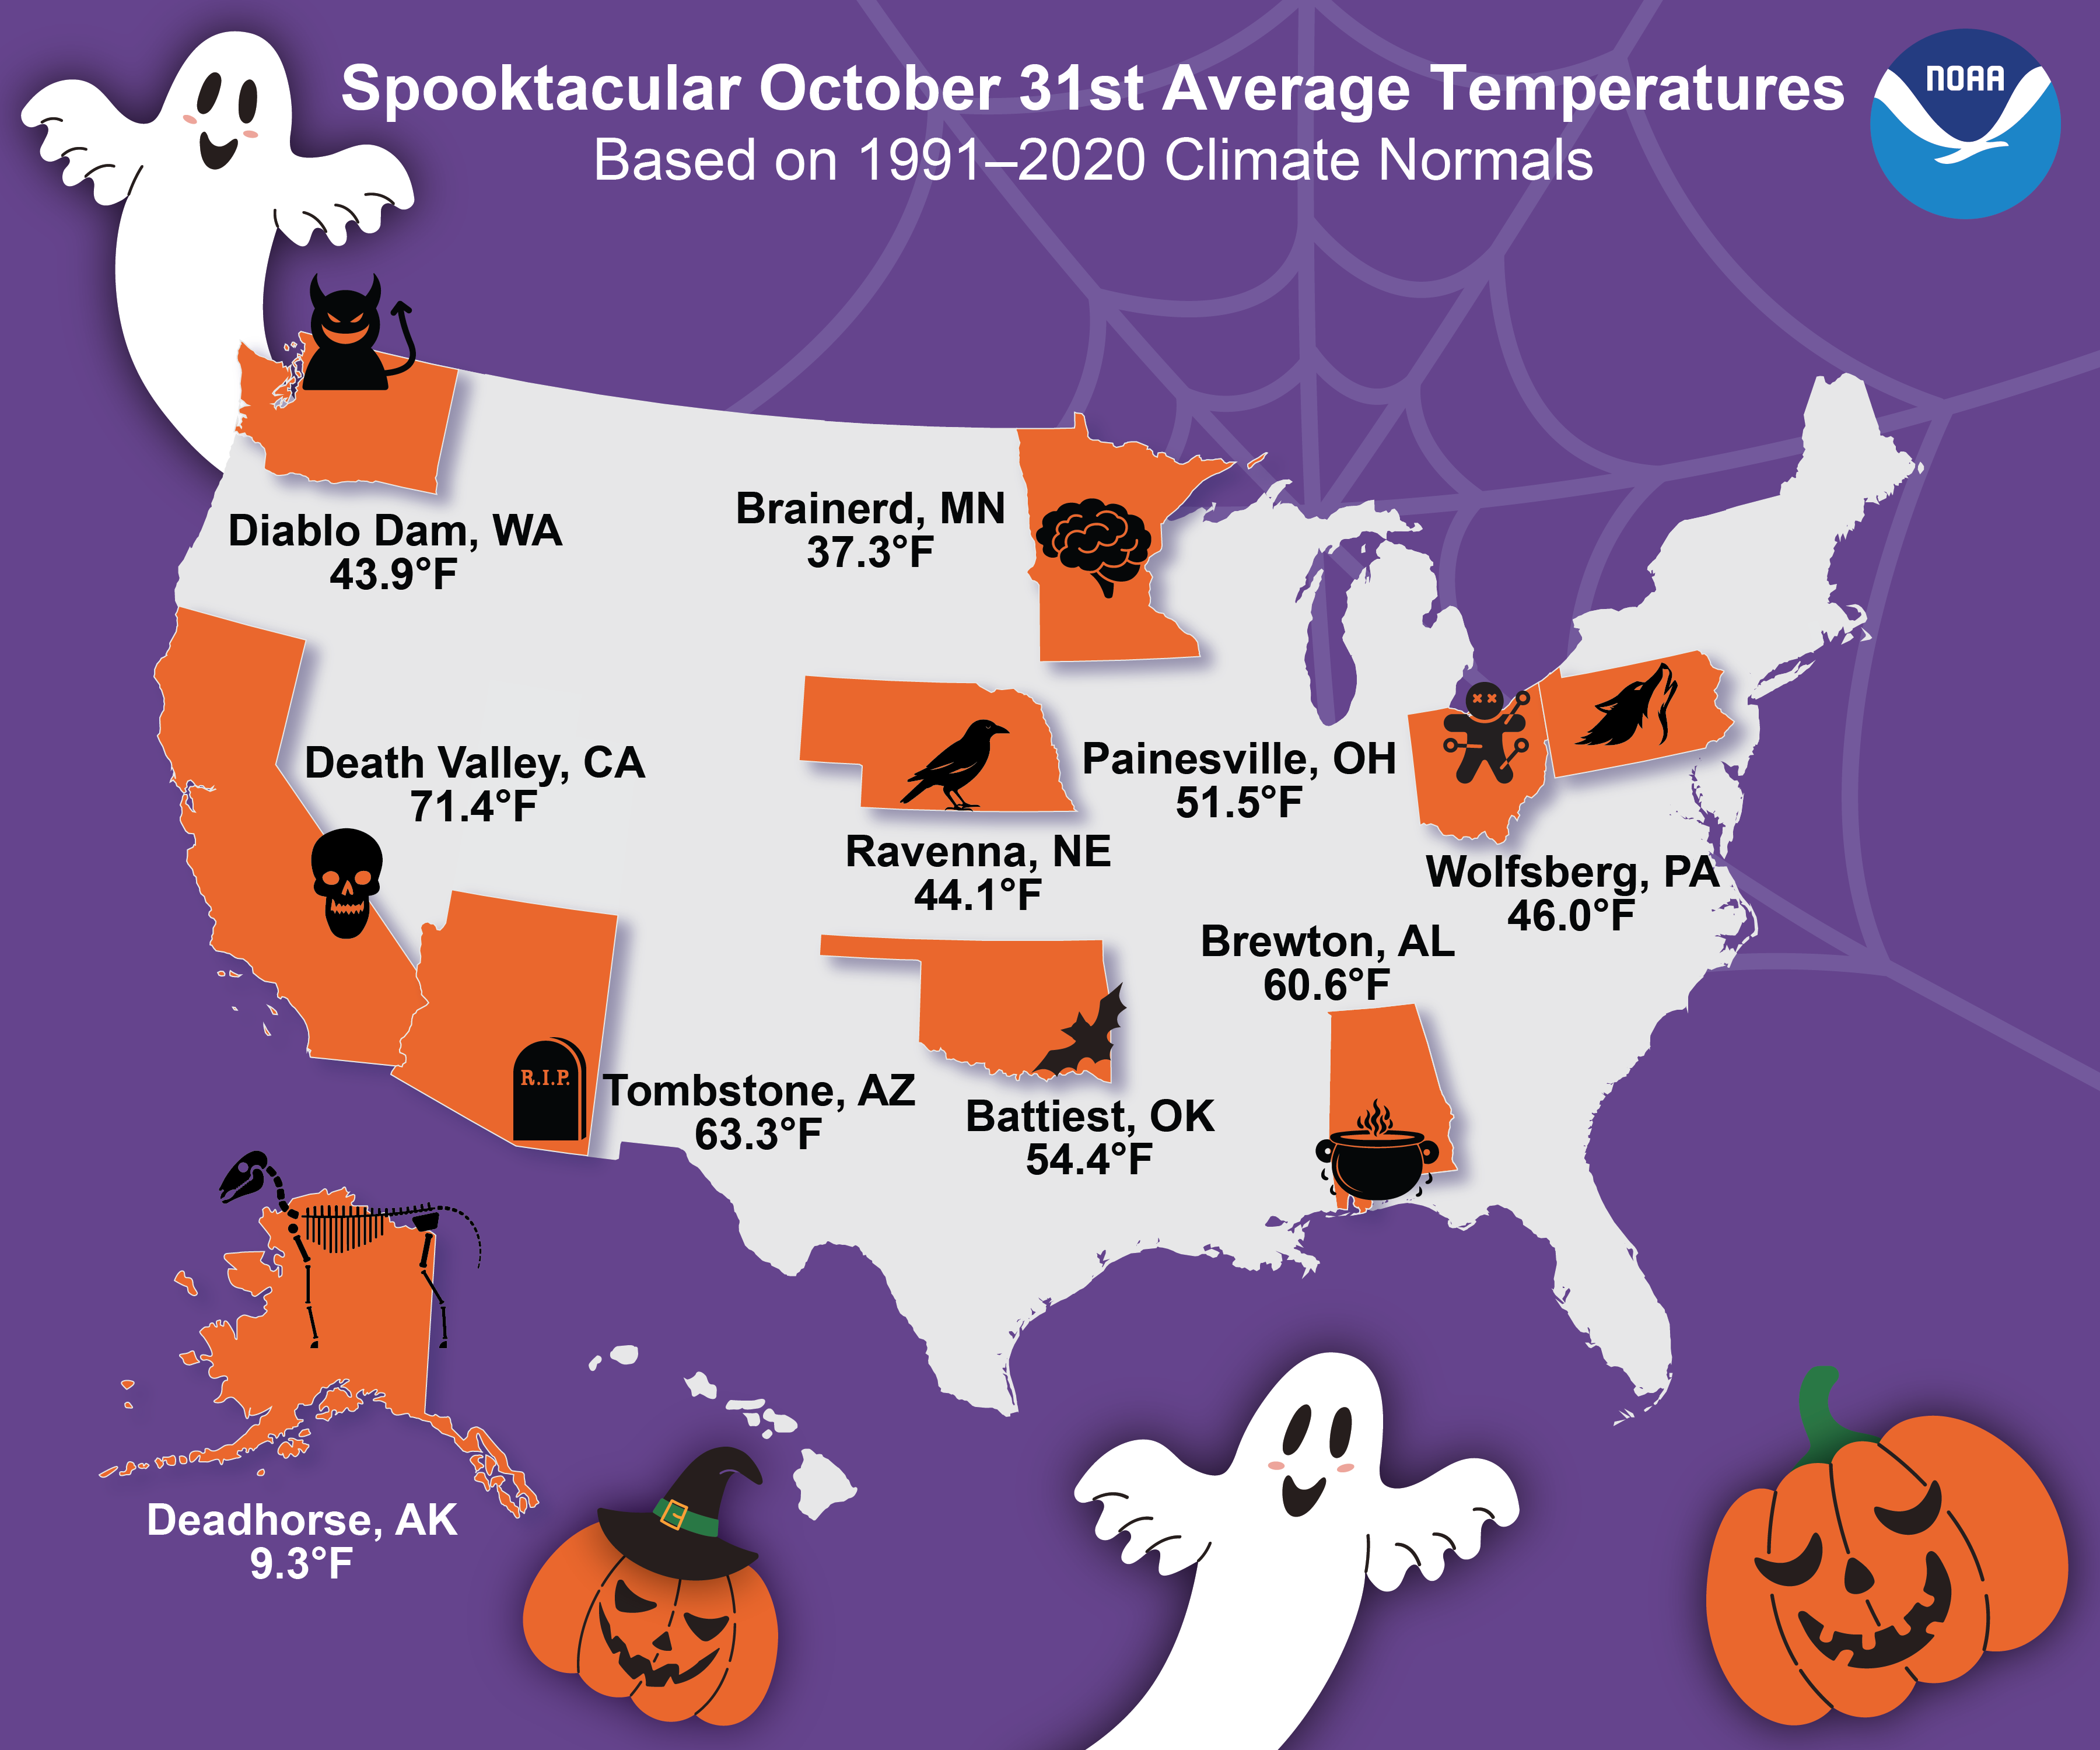 Map of the contiguous United States displaying average temperatures in Fahrenheit from 1991 to 2020 on October 31 for 10 U.S. locations with Halloween-themed names.